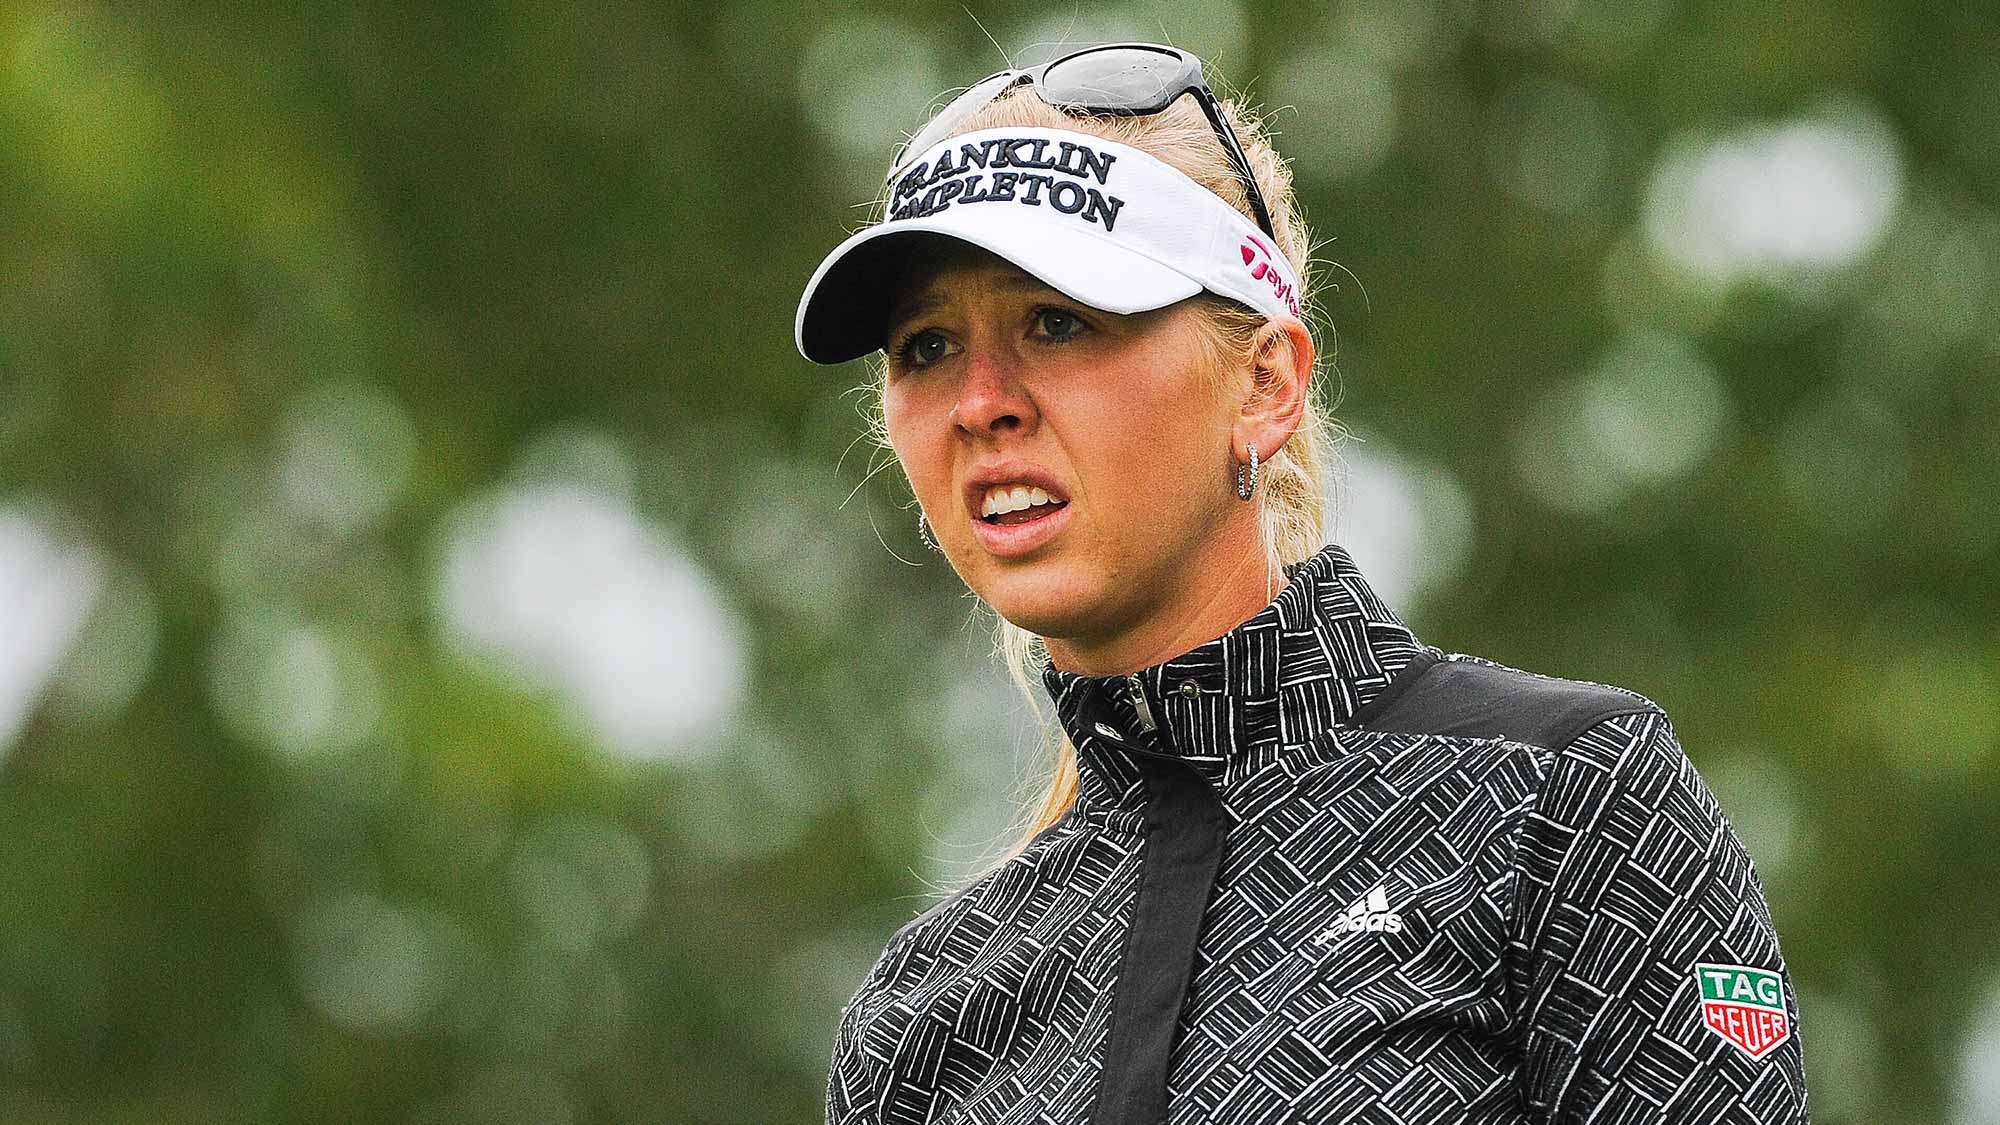 Jessica Korda reacts after taking her tee shot on the 11th hole during the first round of the Canadian Pacific Women's Open at Priddis Greens Golf and Country Club 